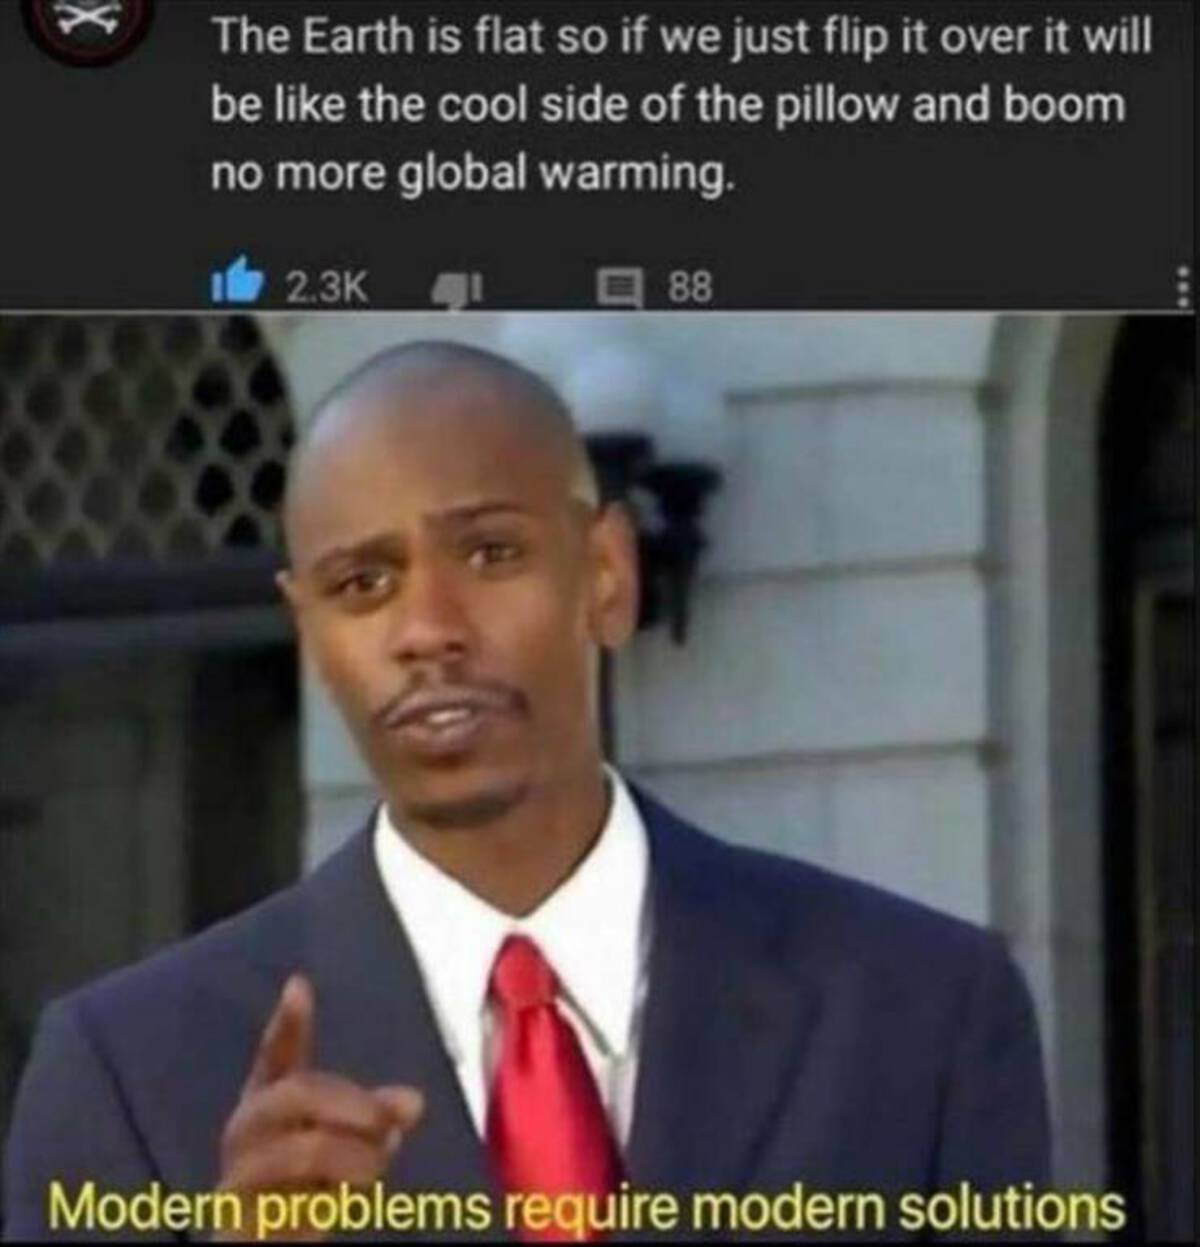 photo caption - X The Earth is flat so if we just flip it over it will be the cool side of the pillow and boom no more global warming. 88 Modern problems require modern solutions